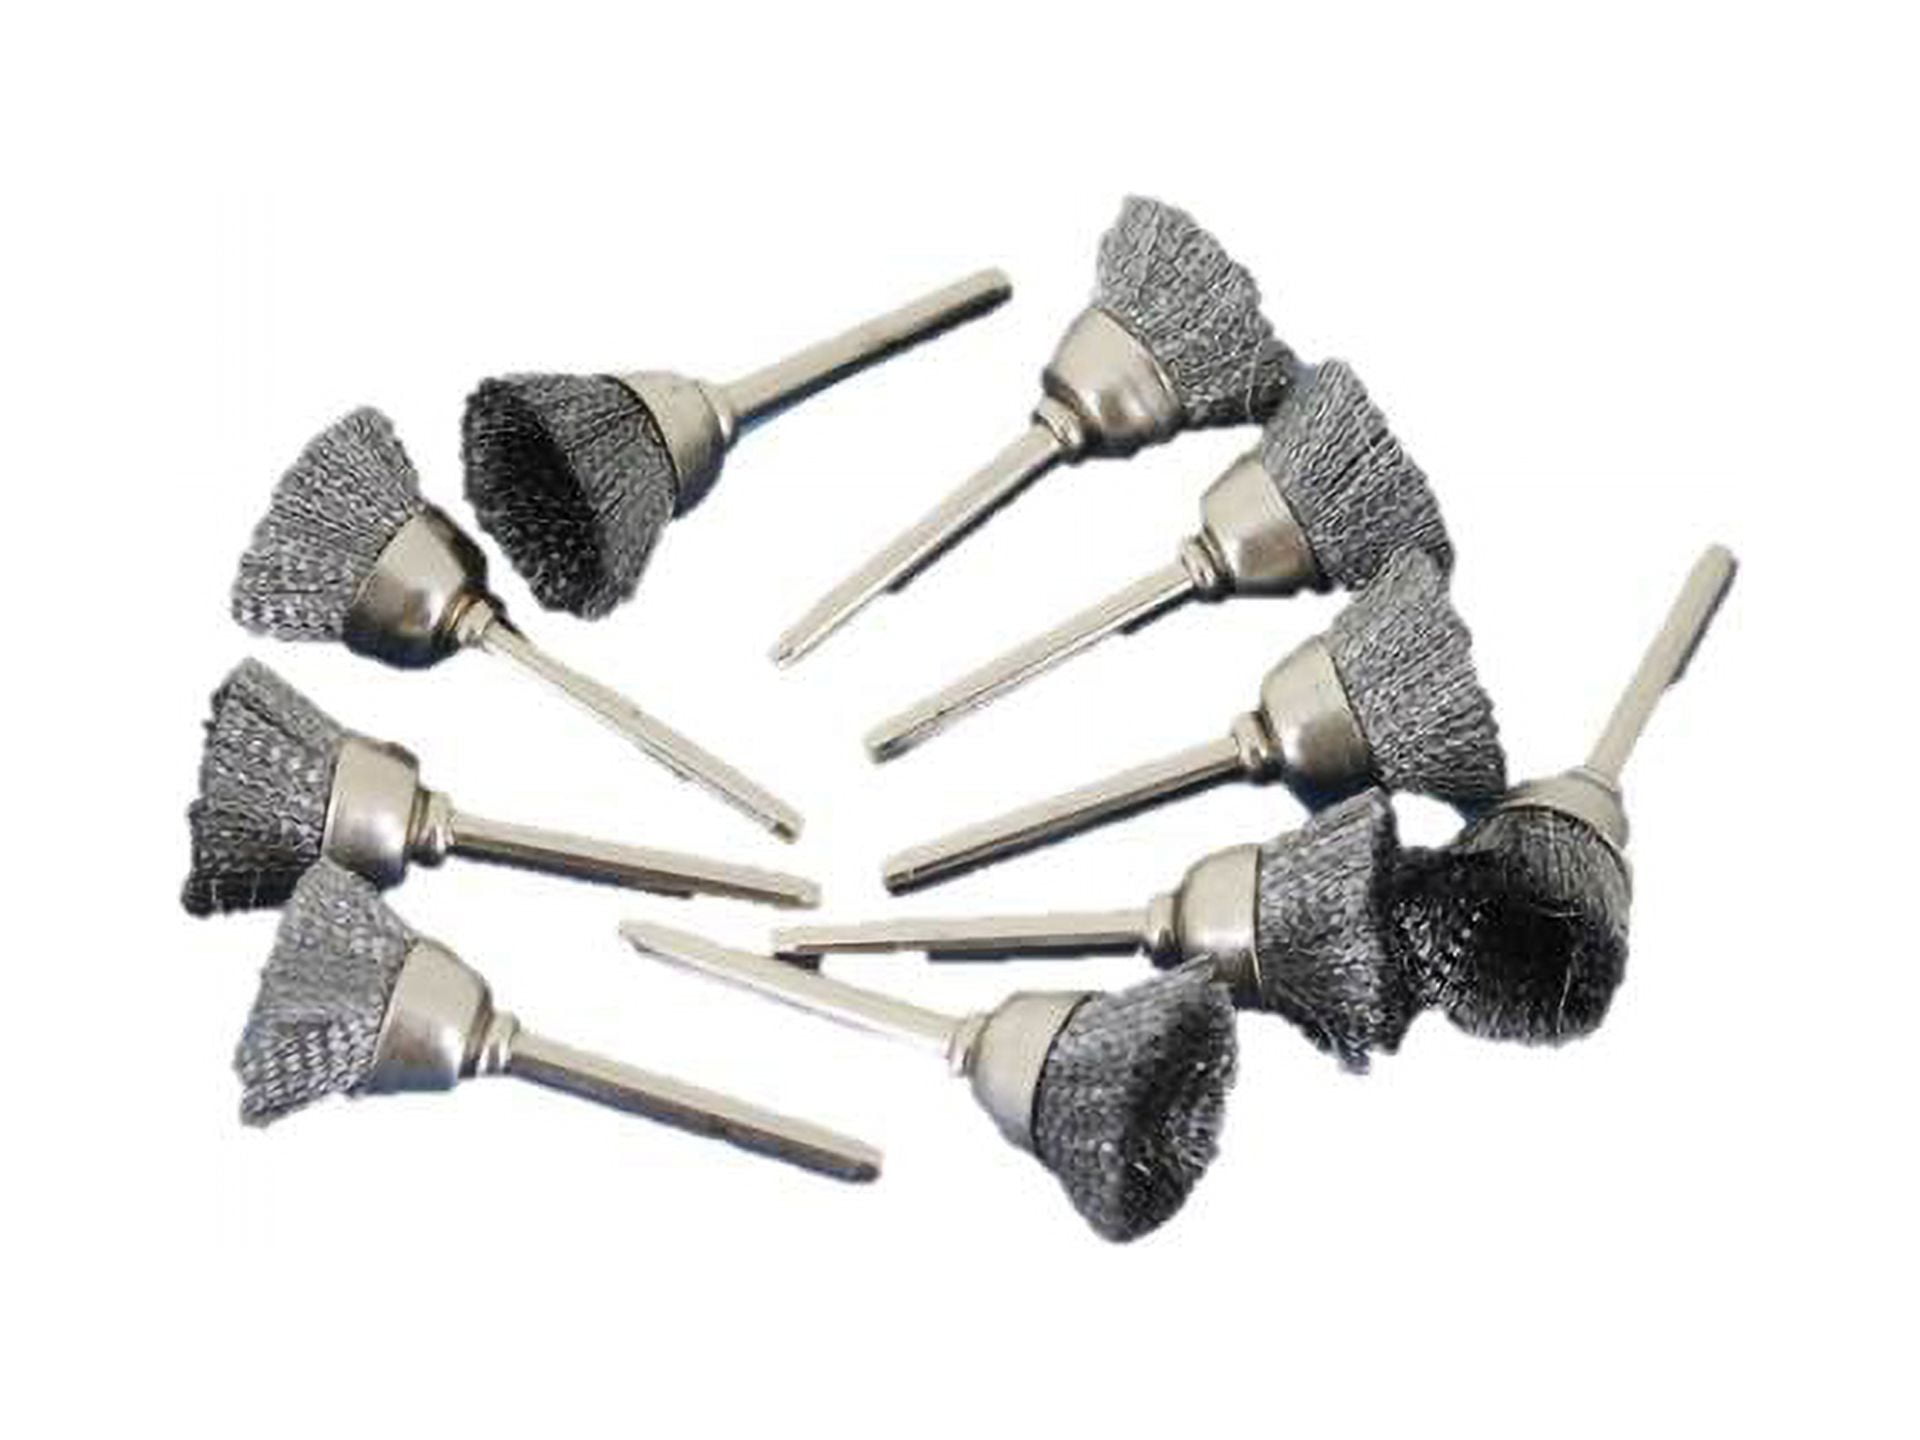 8pcs 3 ″ Wire Cup Brush Set Coarse Crimped Carbon Steel Round Shank for  Drill